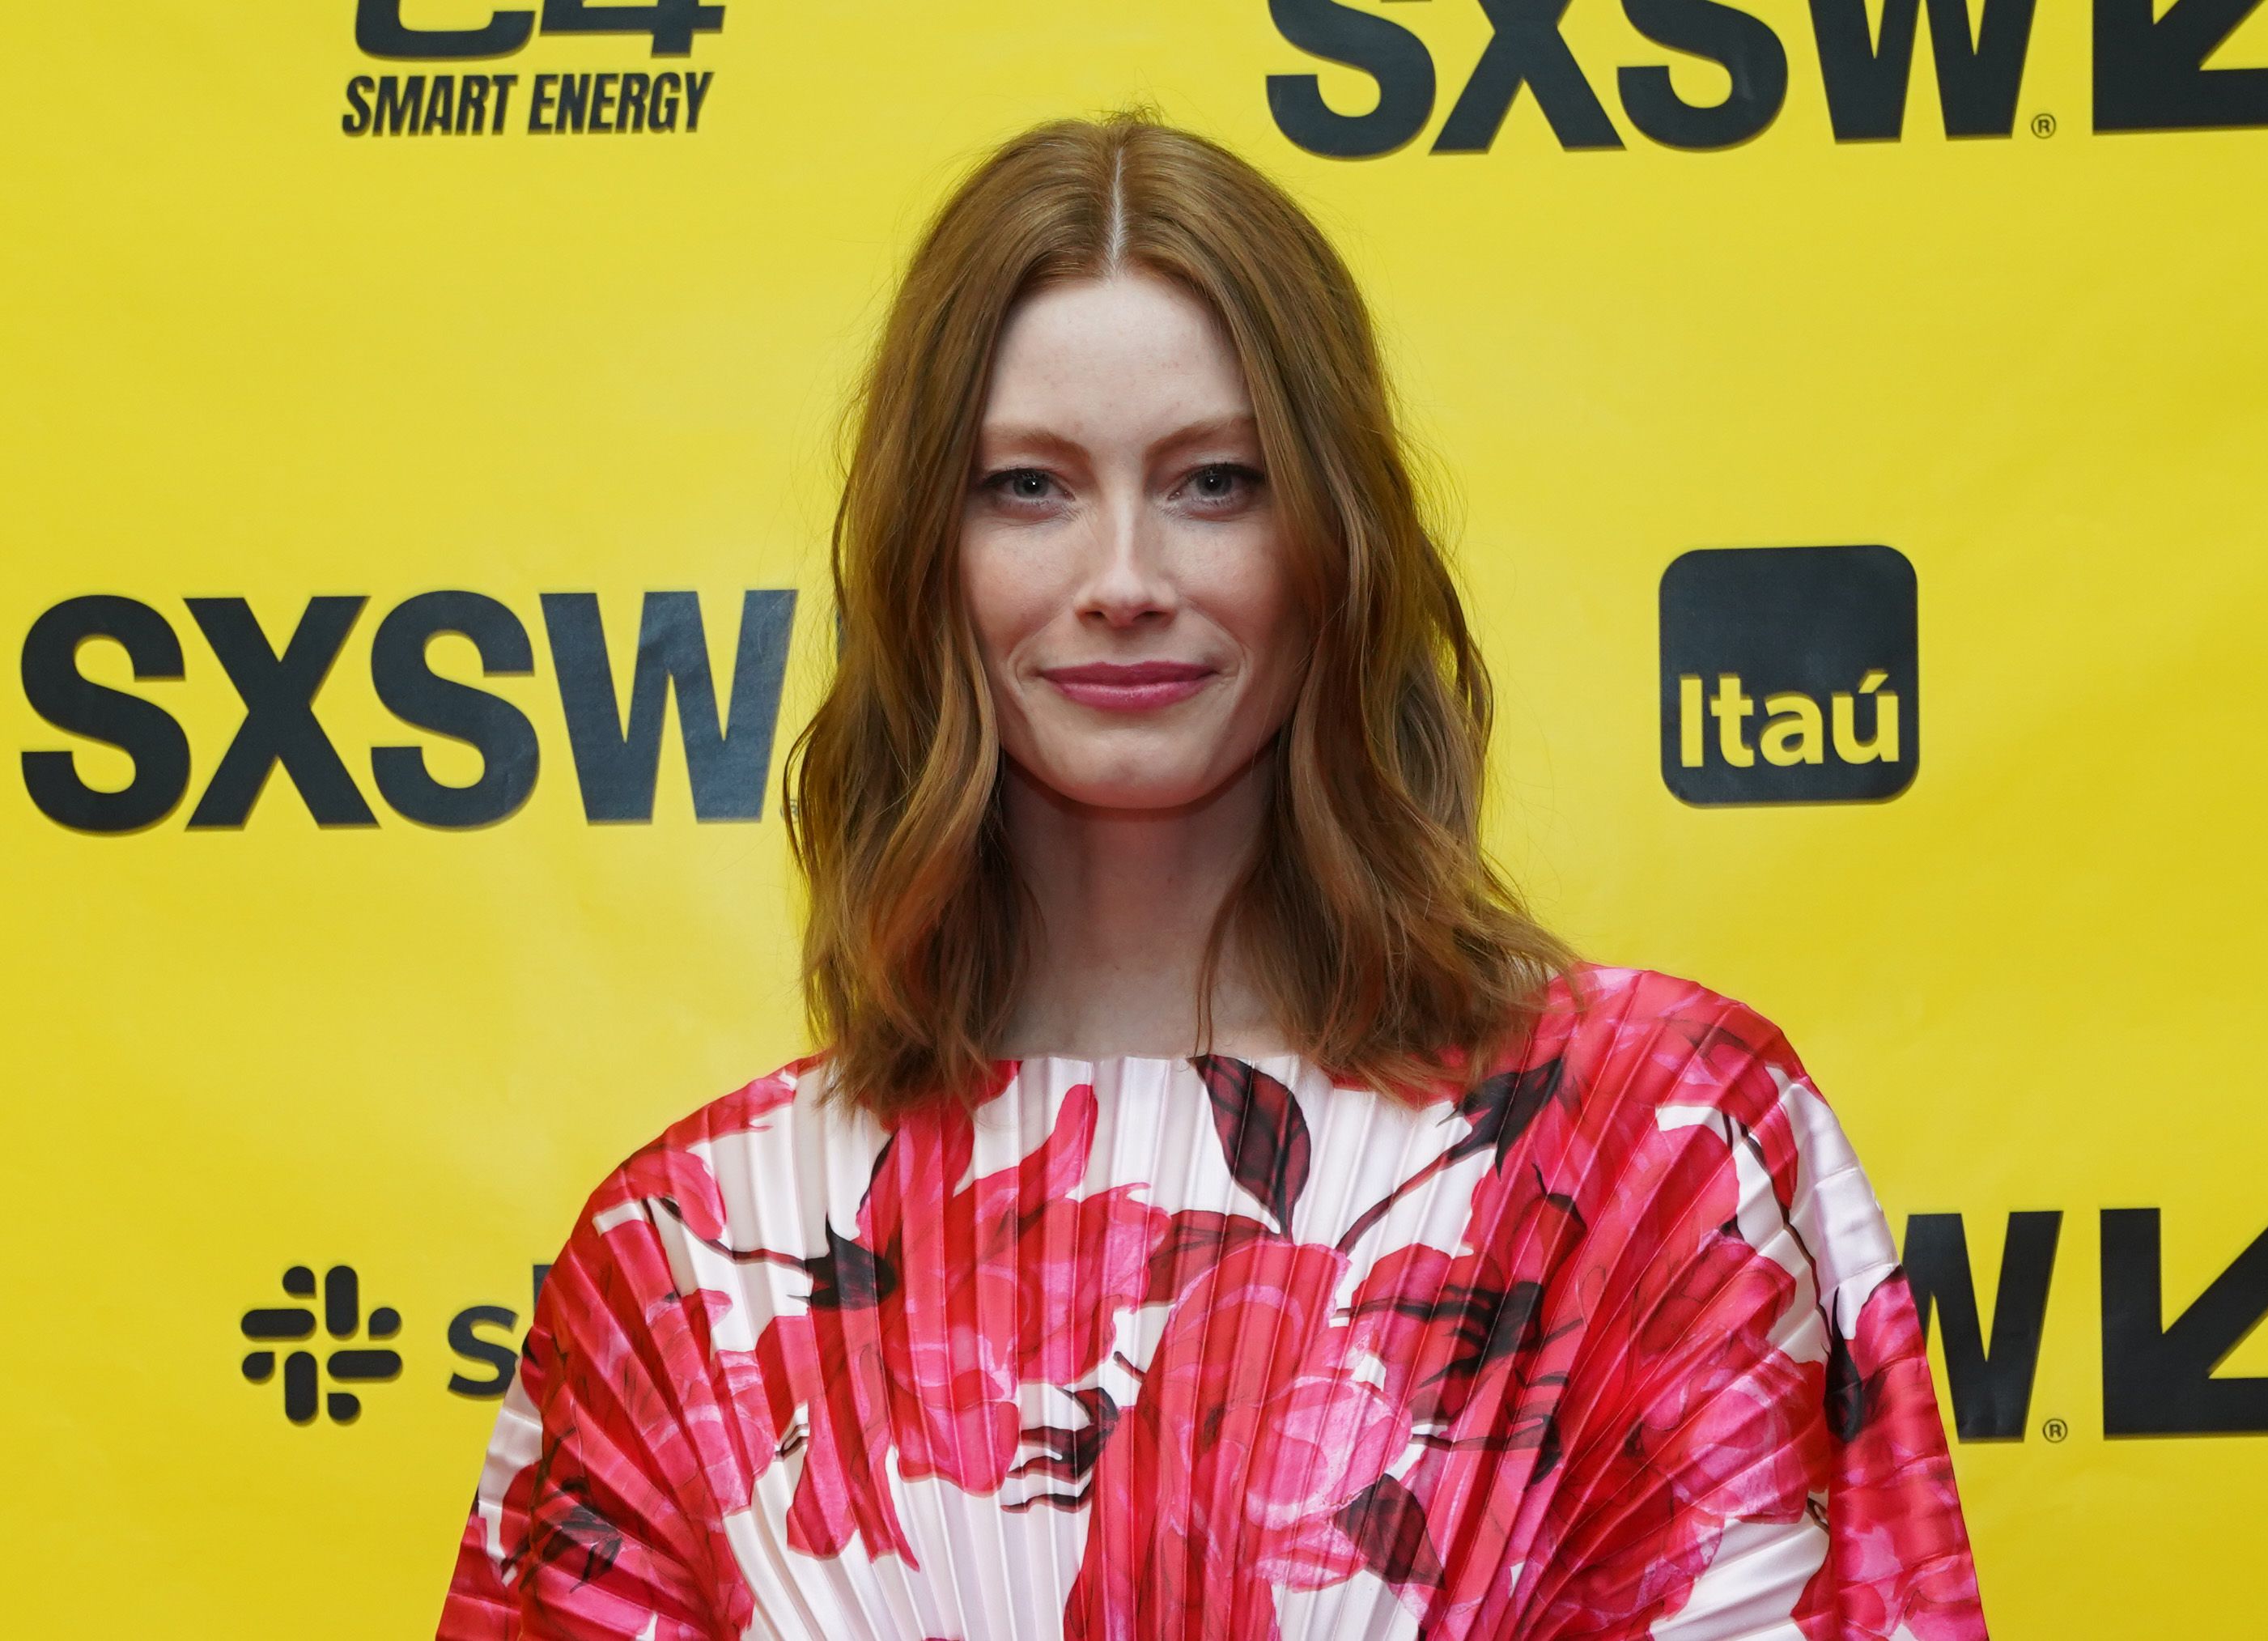 Evil Dead Rise' Star Alyssa Sutherland on Playing Her Most Challenging Role  Yet